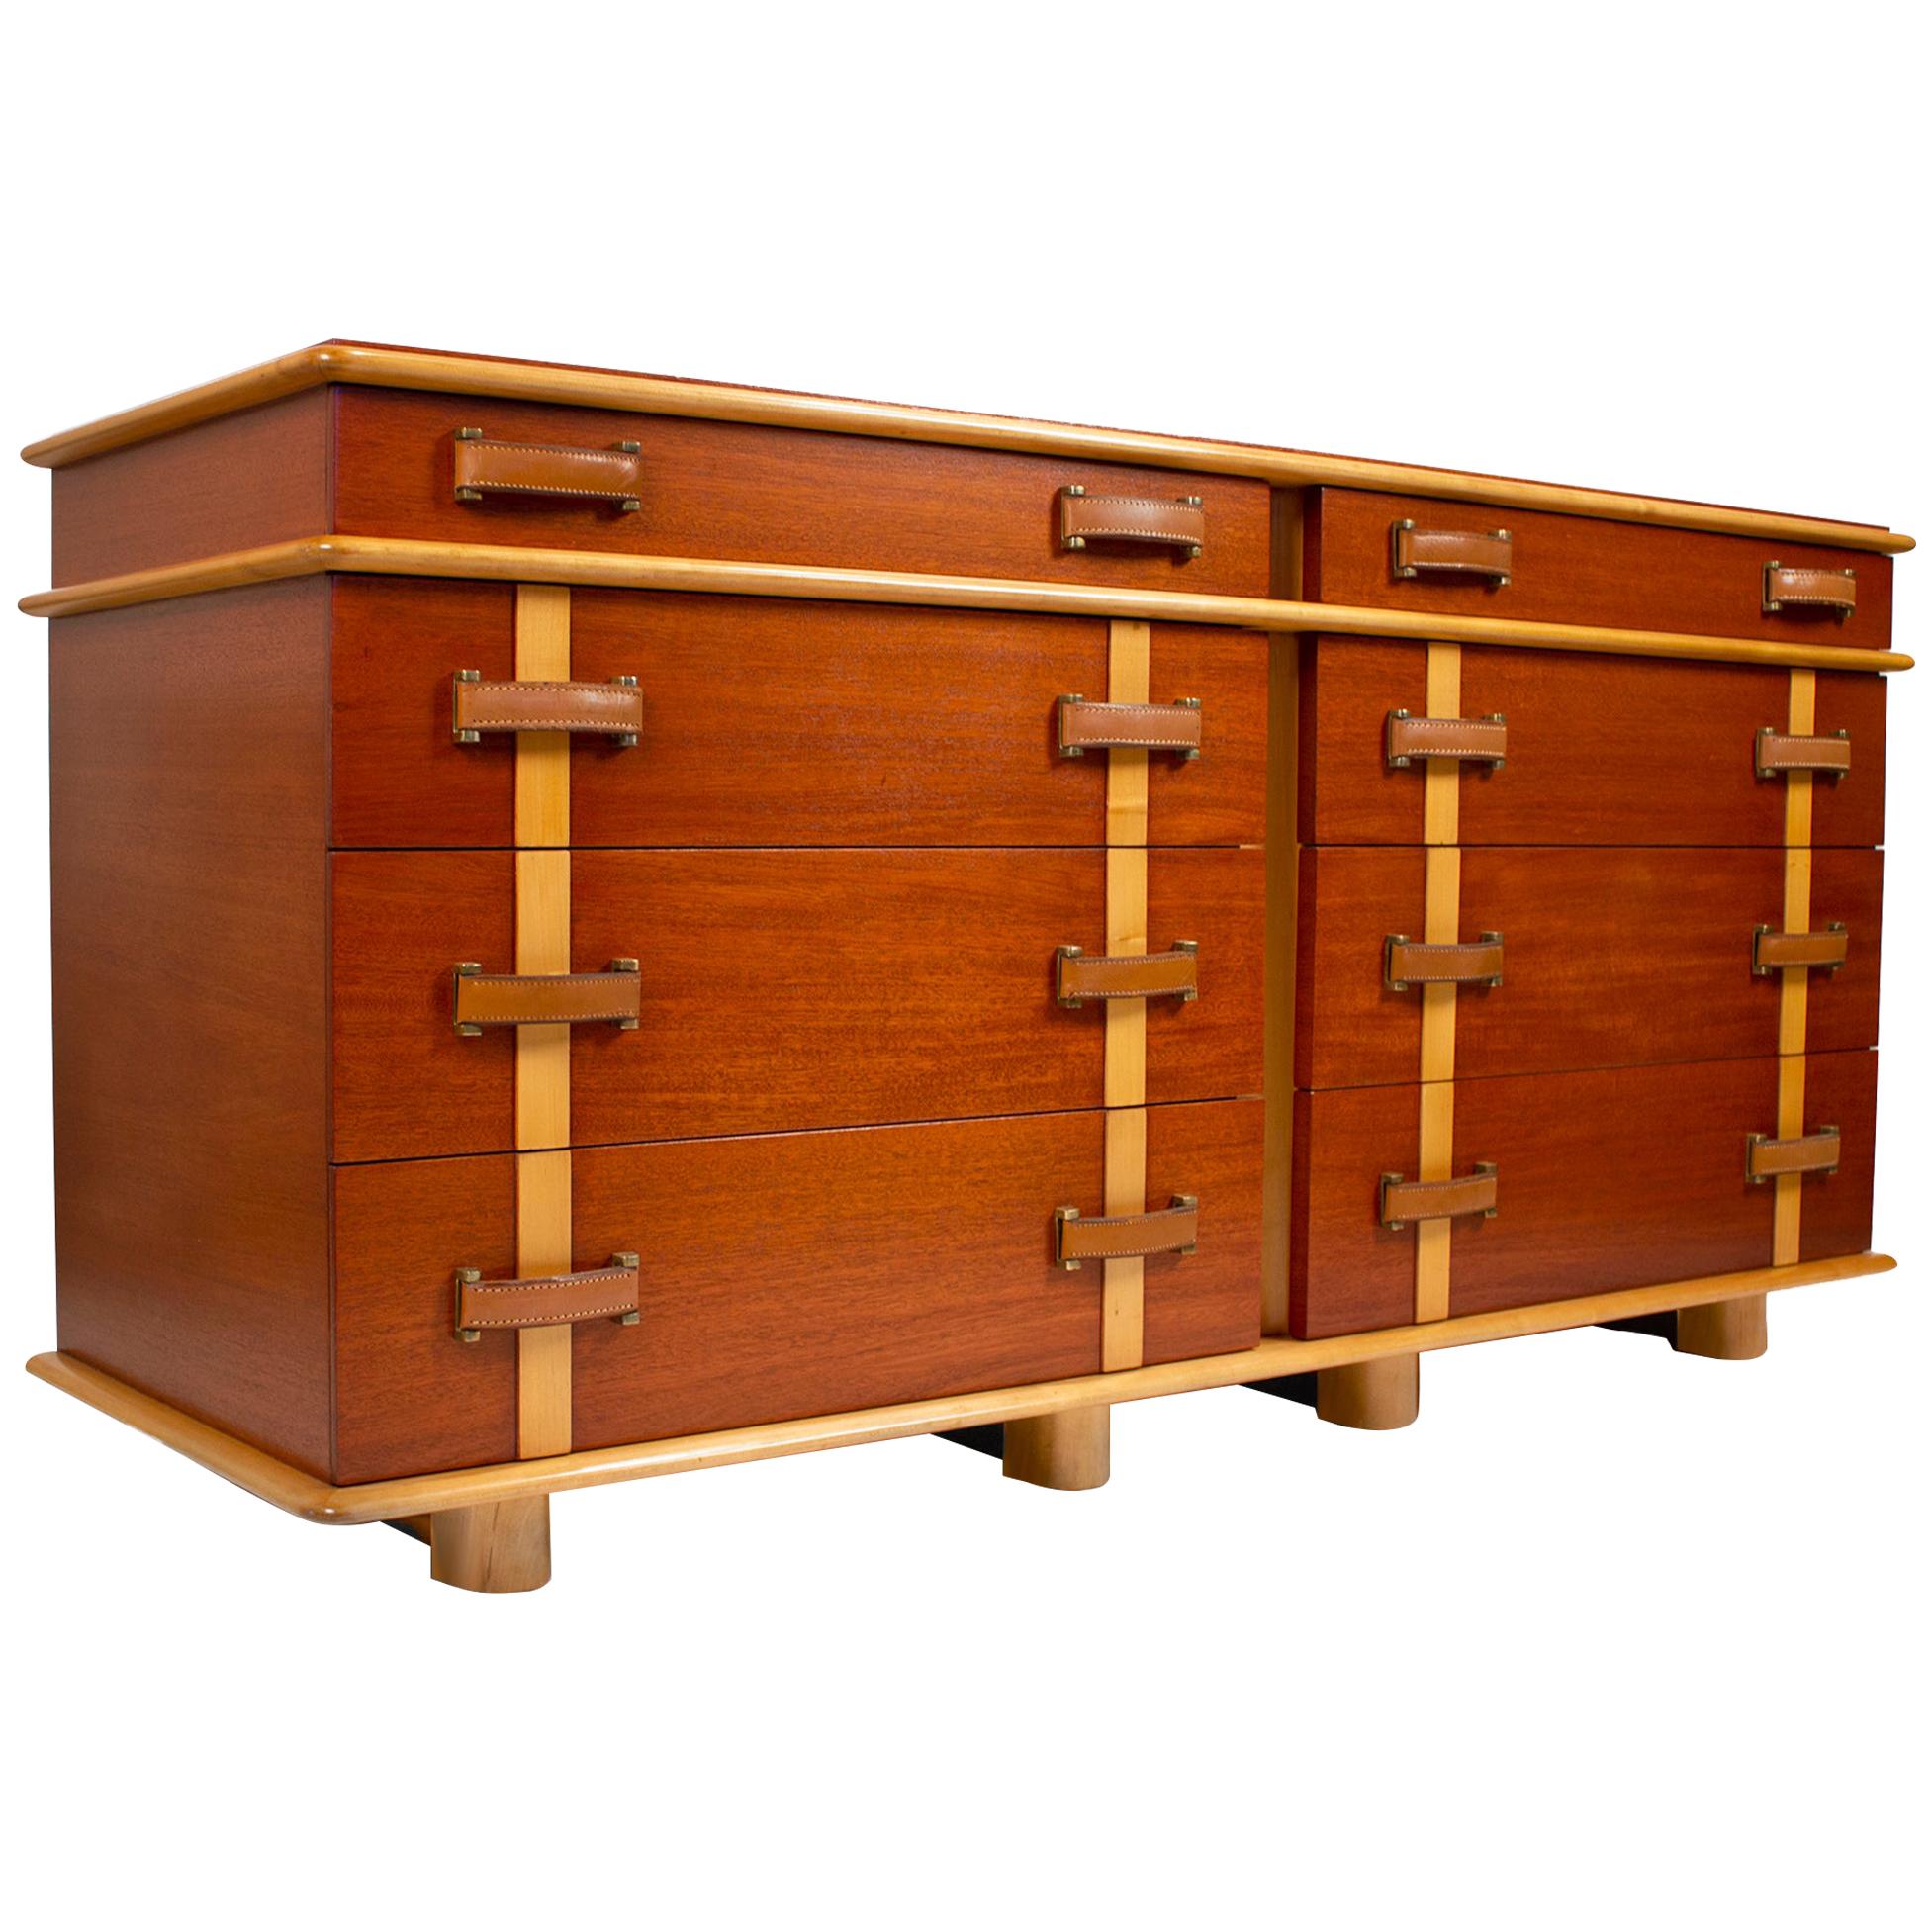 Paul Frankl Dresser & Mirror 'Station Wagon Series' in Mahogany Maple & Leather